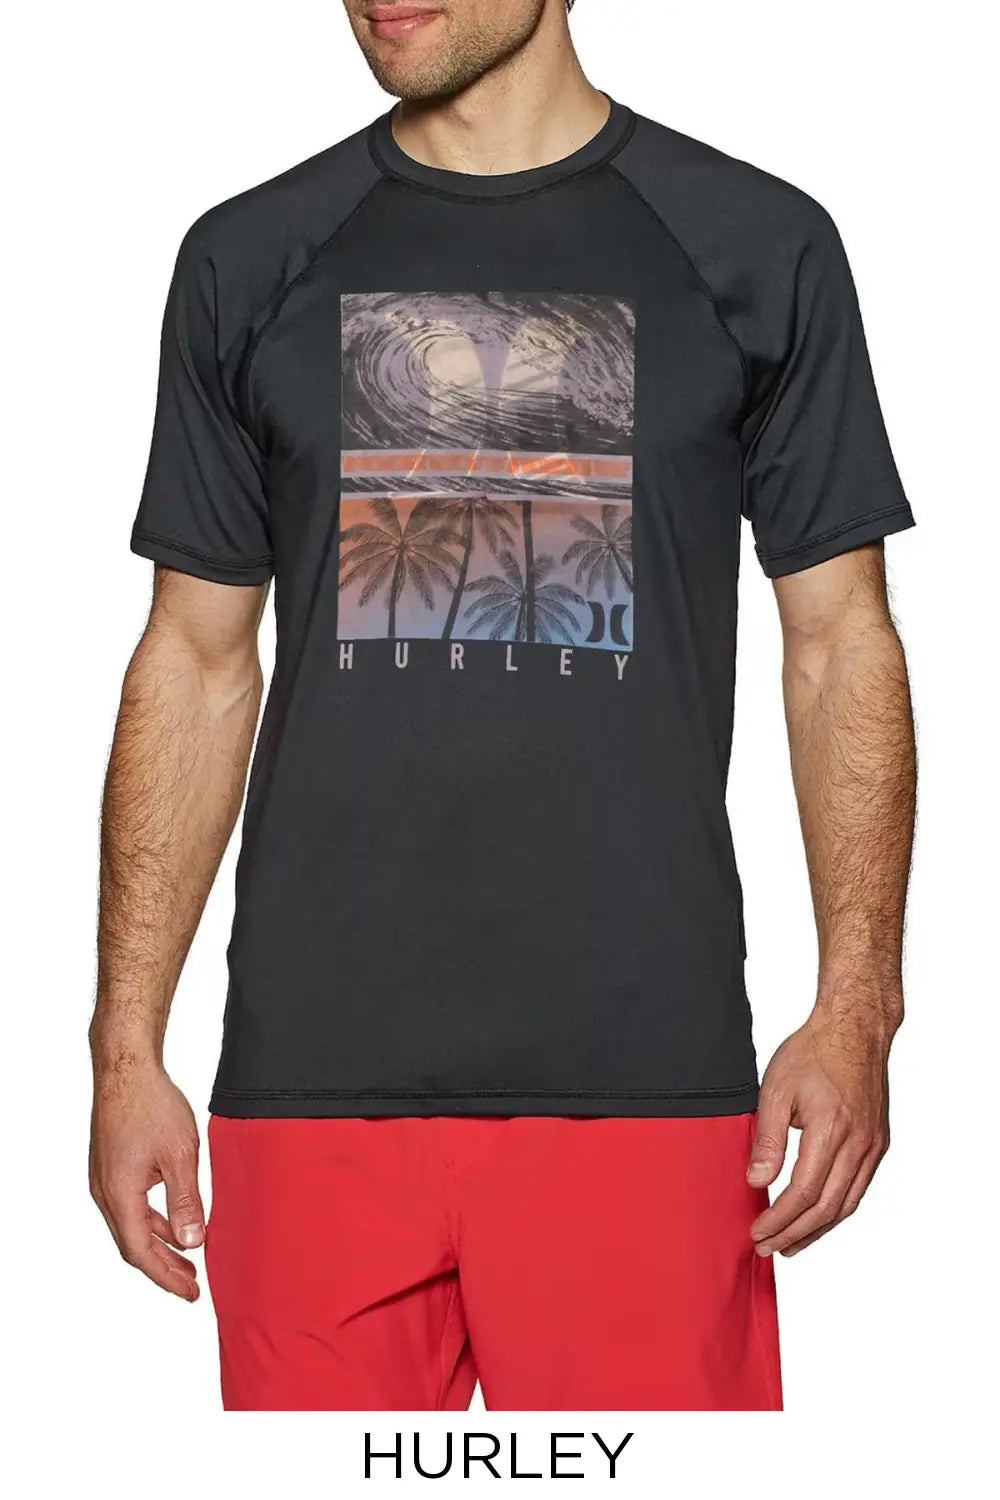 Hurley Surf Water sports T-Shirt Black 2 / S